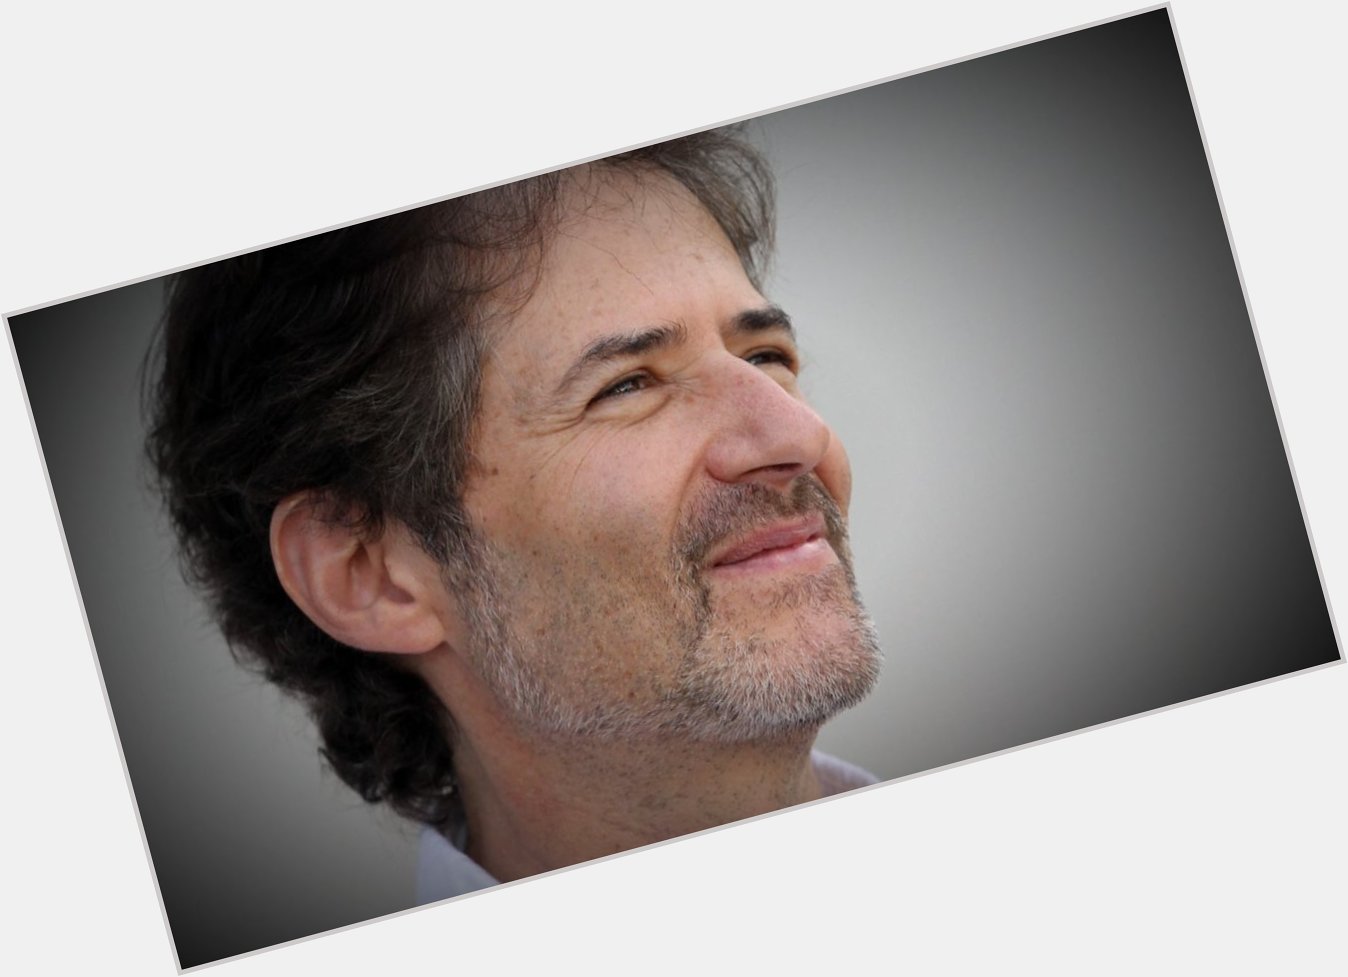 Happy Birthday James Horner! For the movie Cocoon, you bridged *youth and age* brilliantly:  